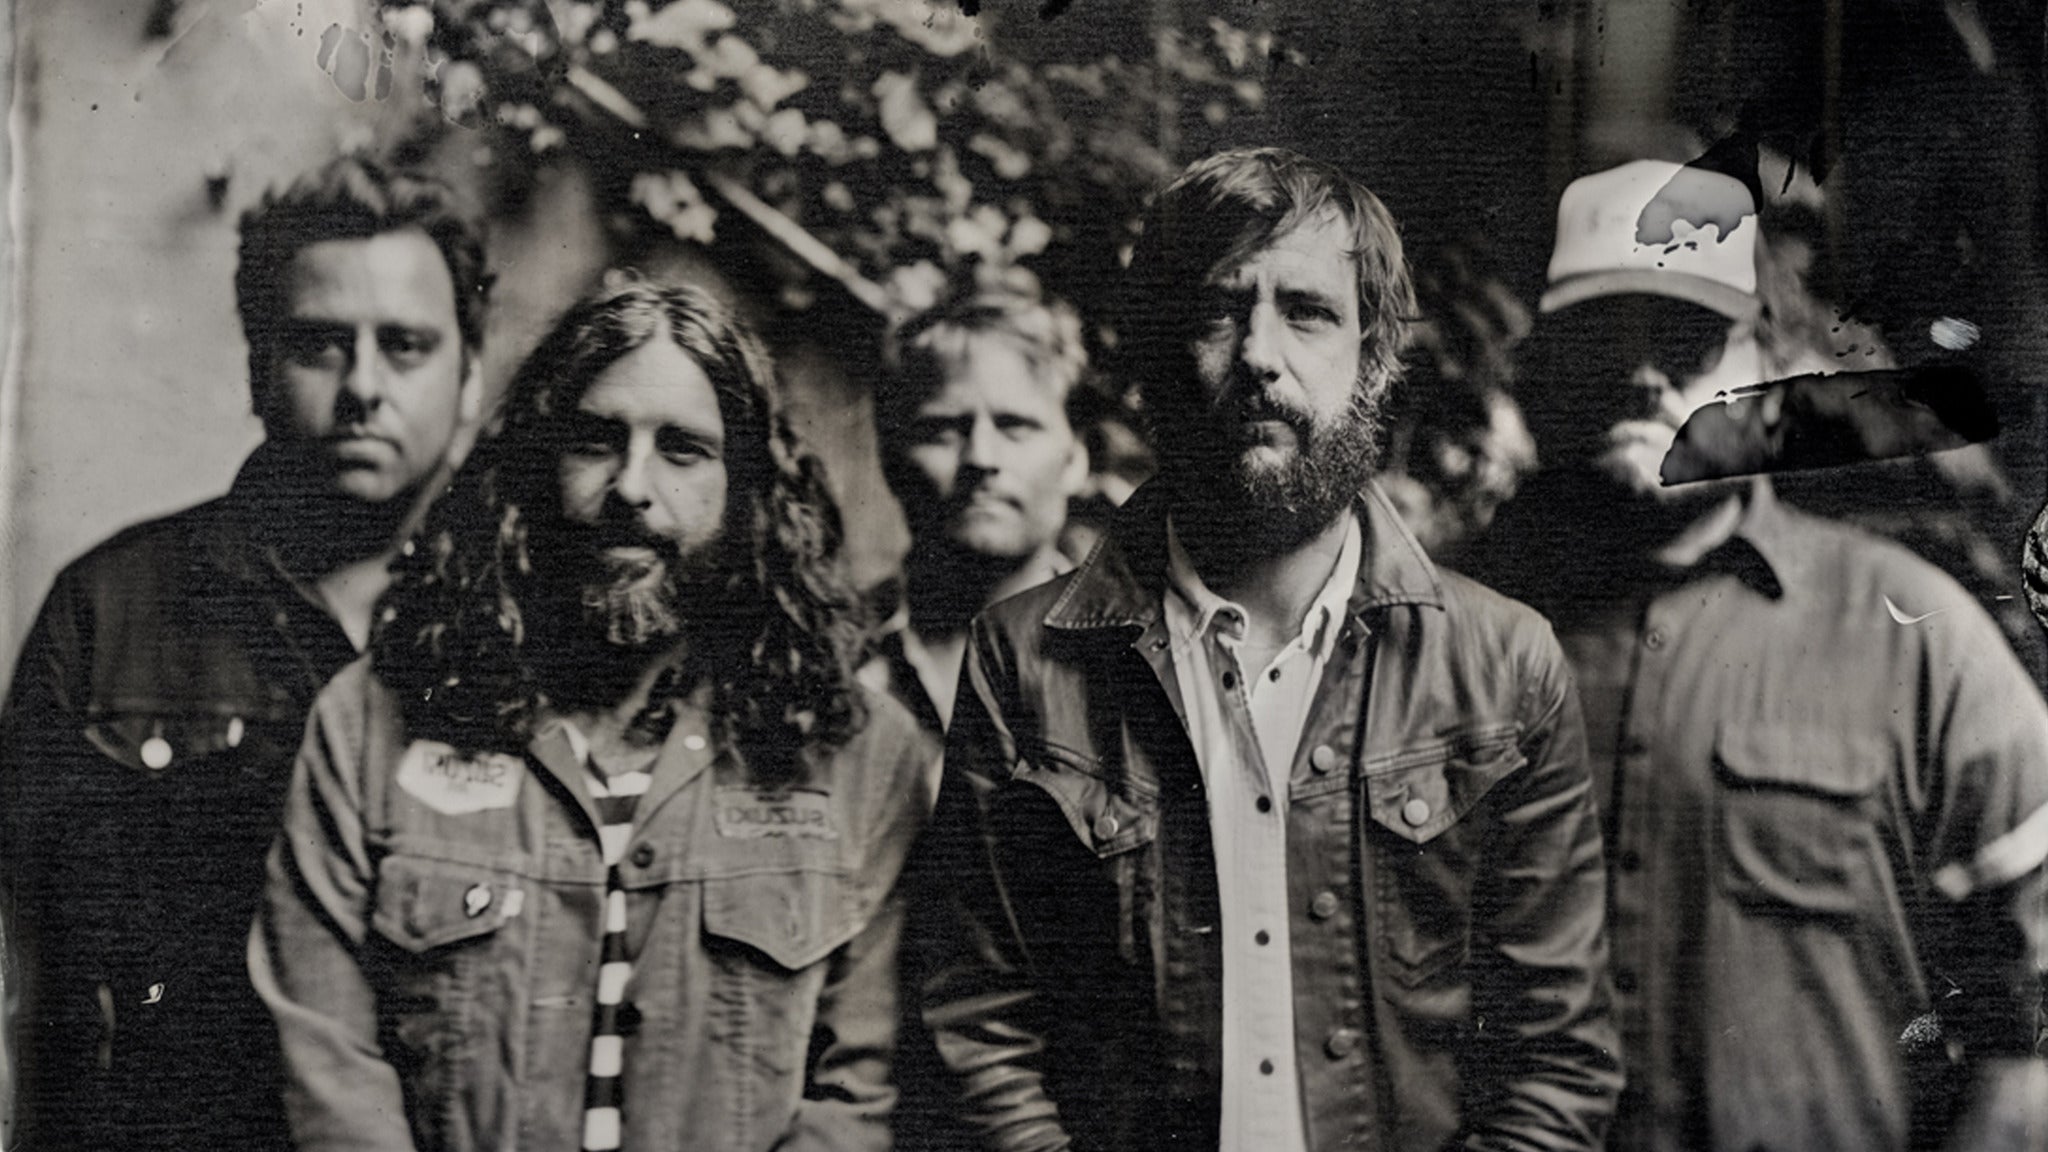 Band of Horses presale code for advance tickets in Spokane